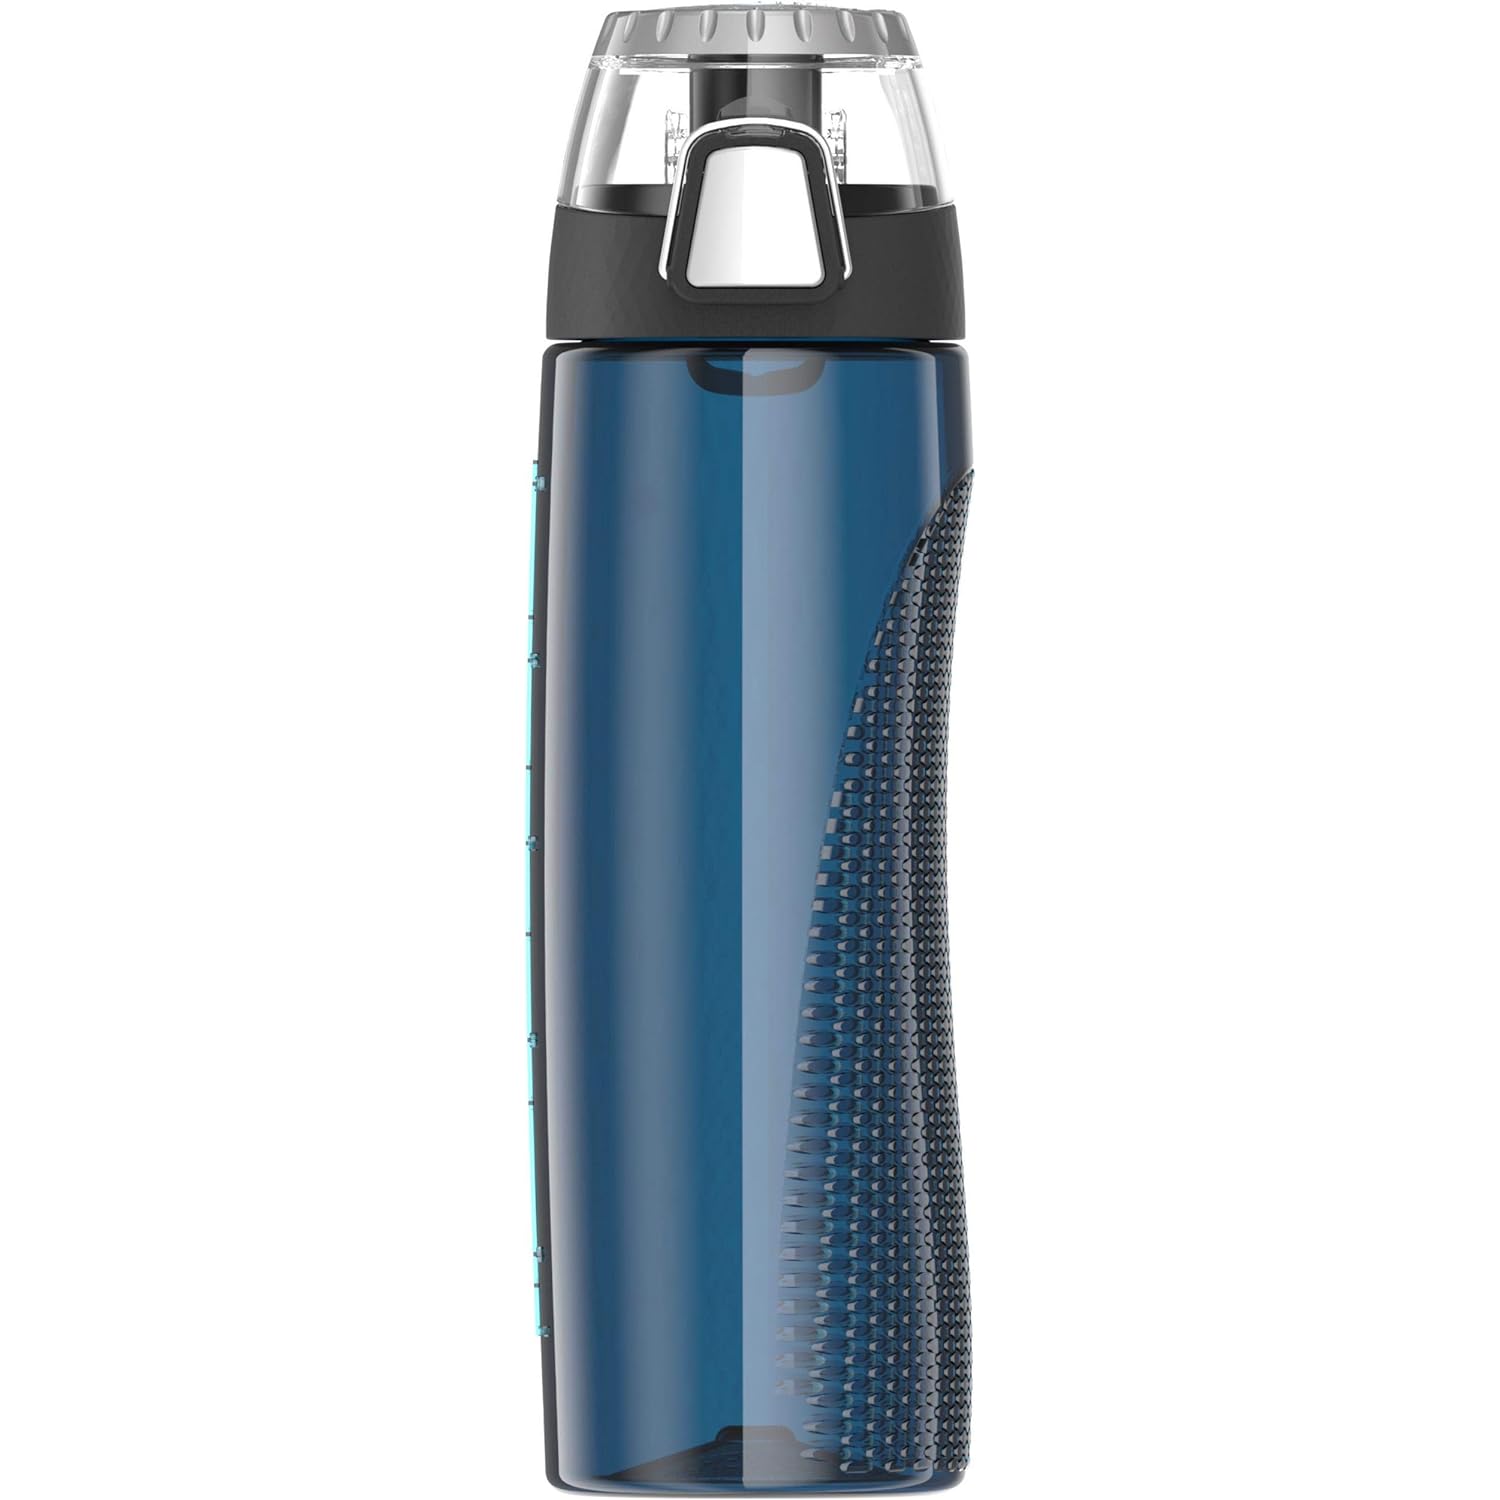 THERMOS Hydration Bottle with Meter, Midnight Blue, 24 Ounce